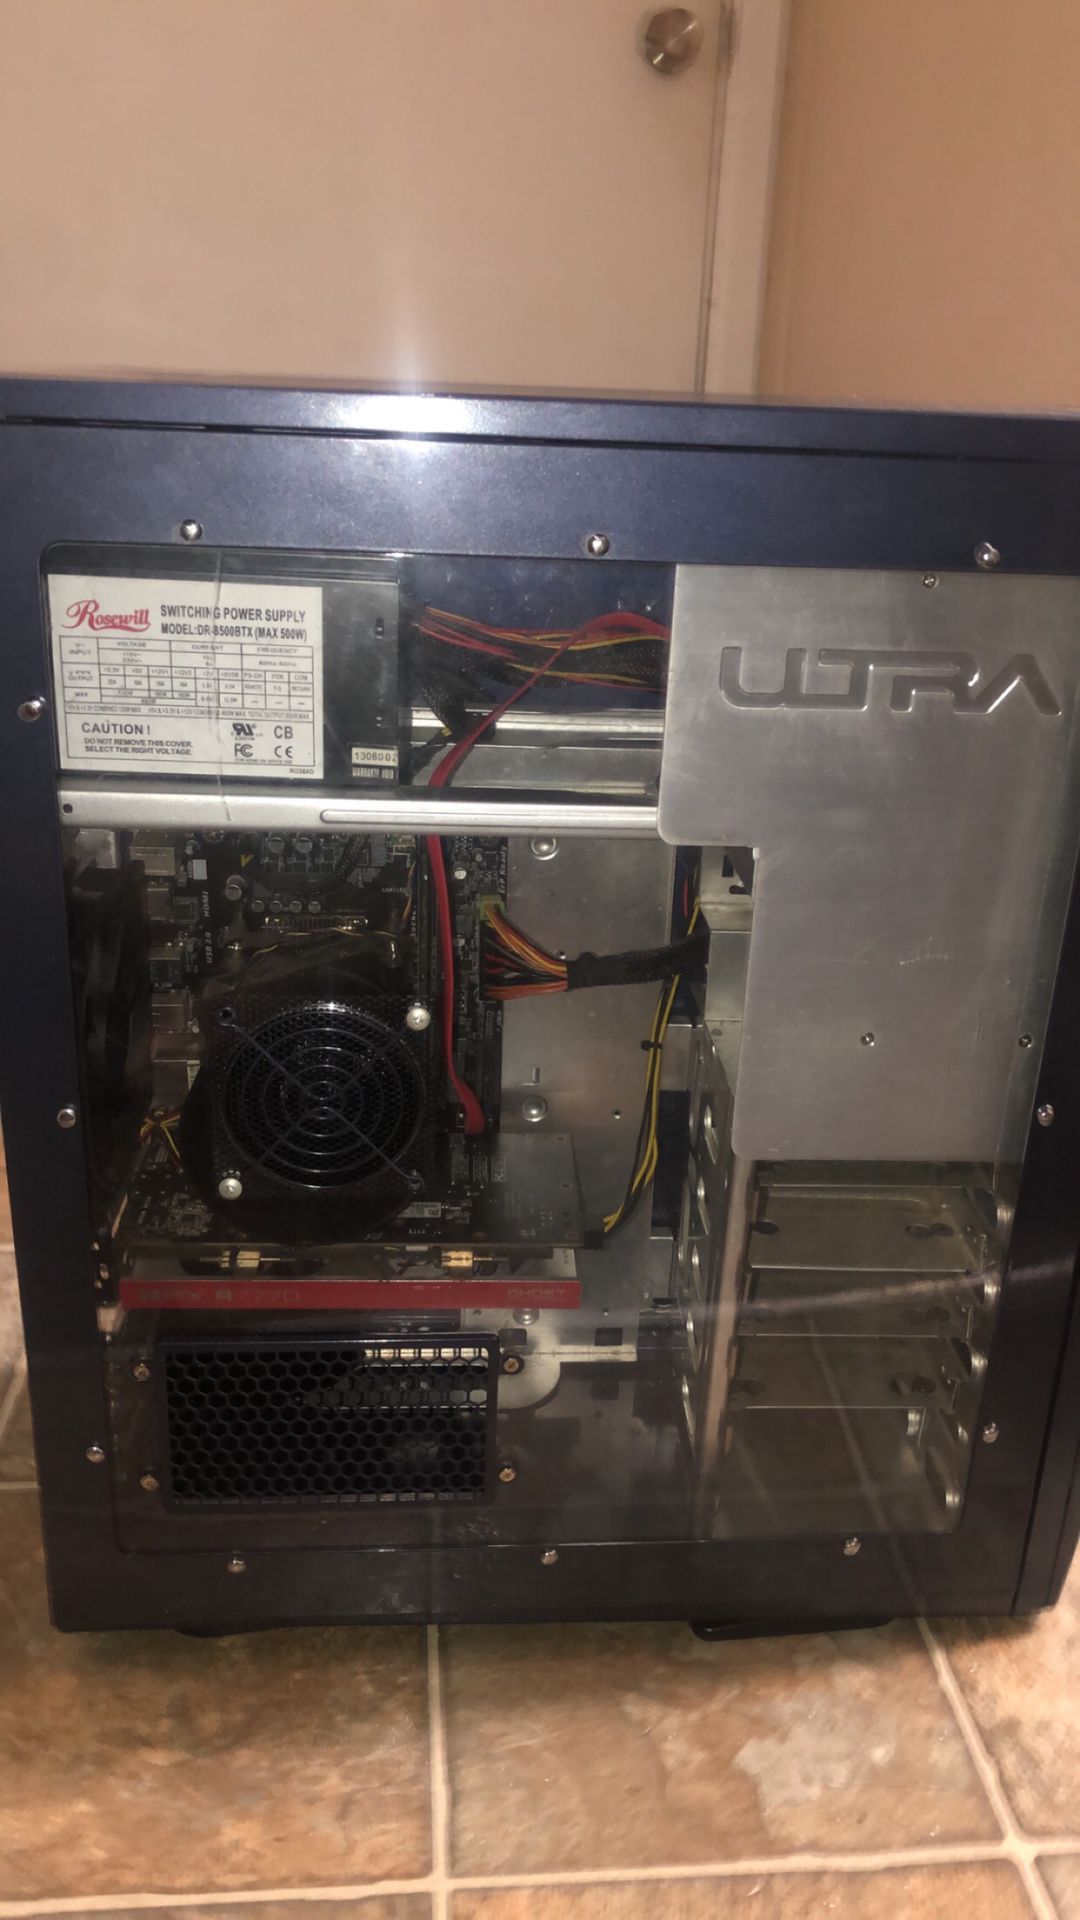 lowend gaming pc + free dell monitor